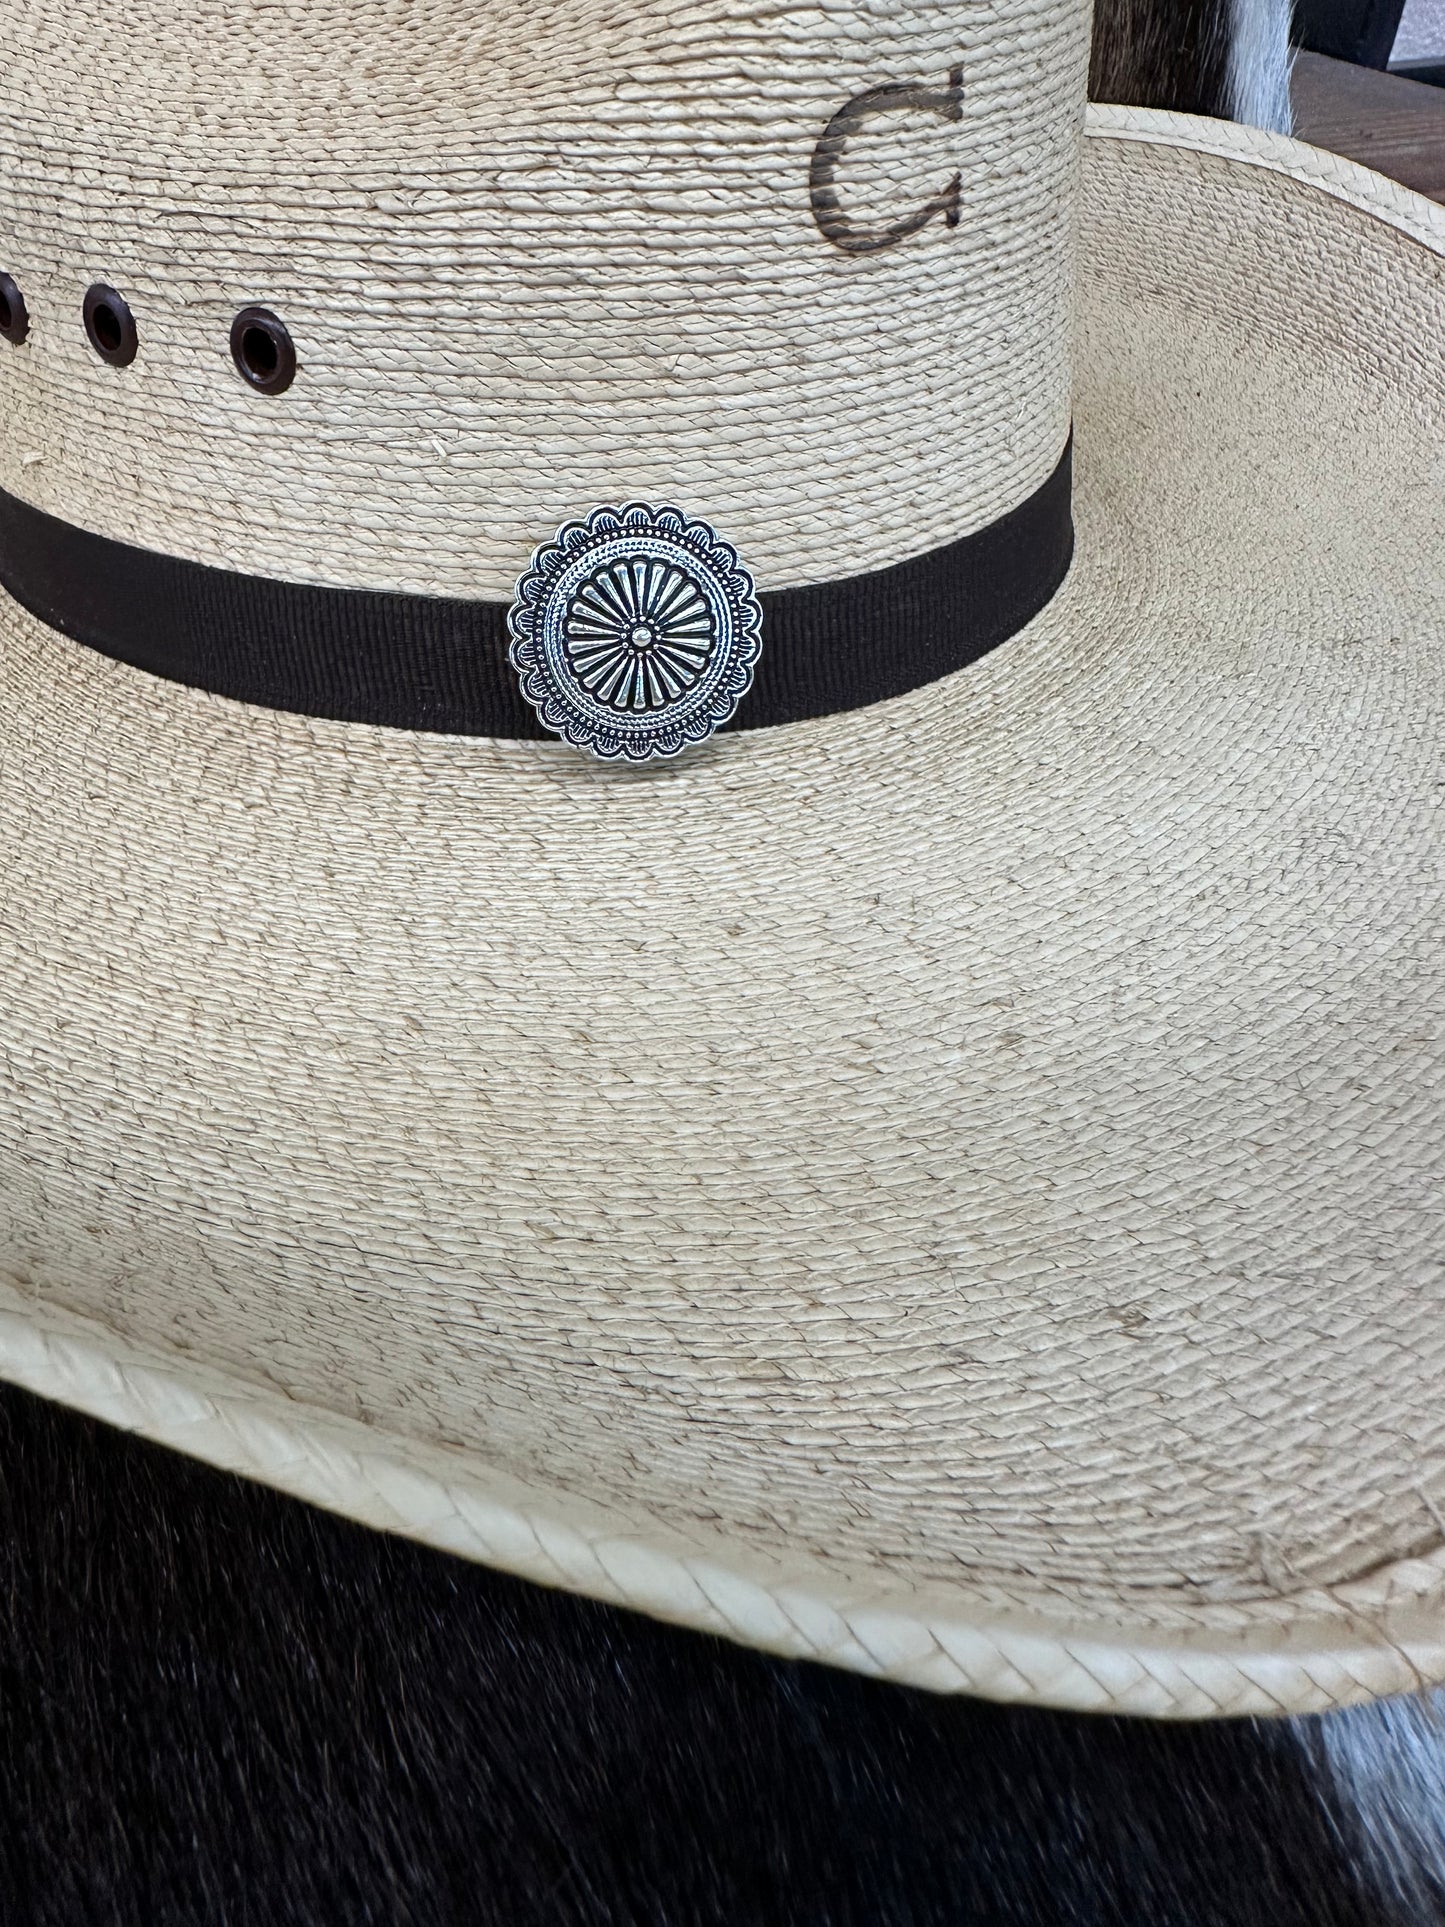 The Silver Stamped Concho Hat Pin